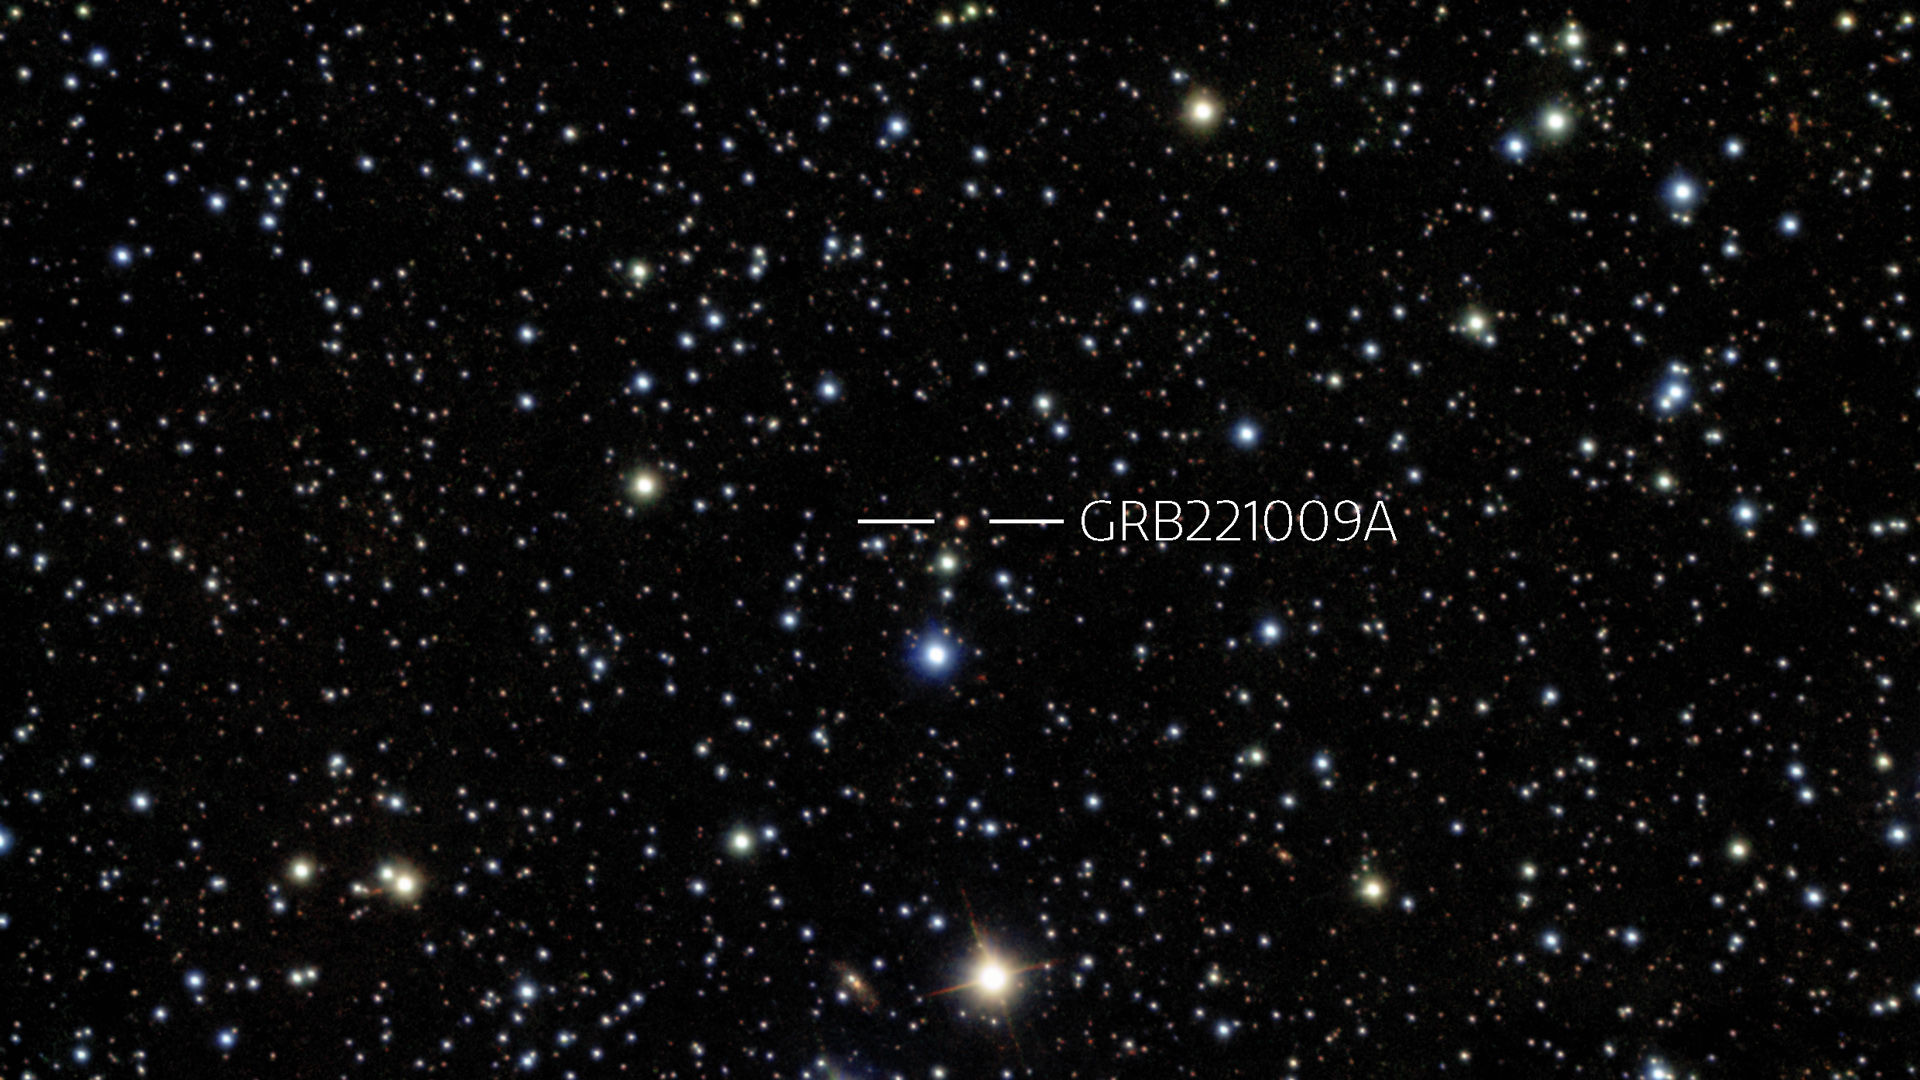 The record-breaking GRB221009A gamma-ray burst observed by the Gemini South telescope in Chile.